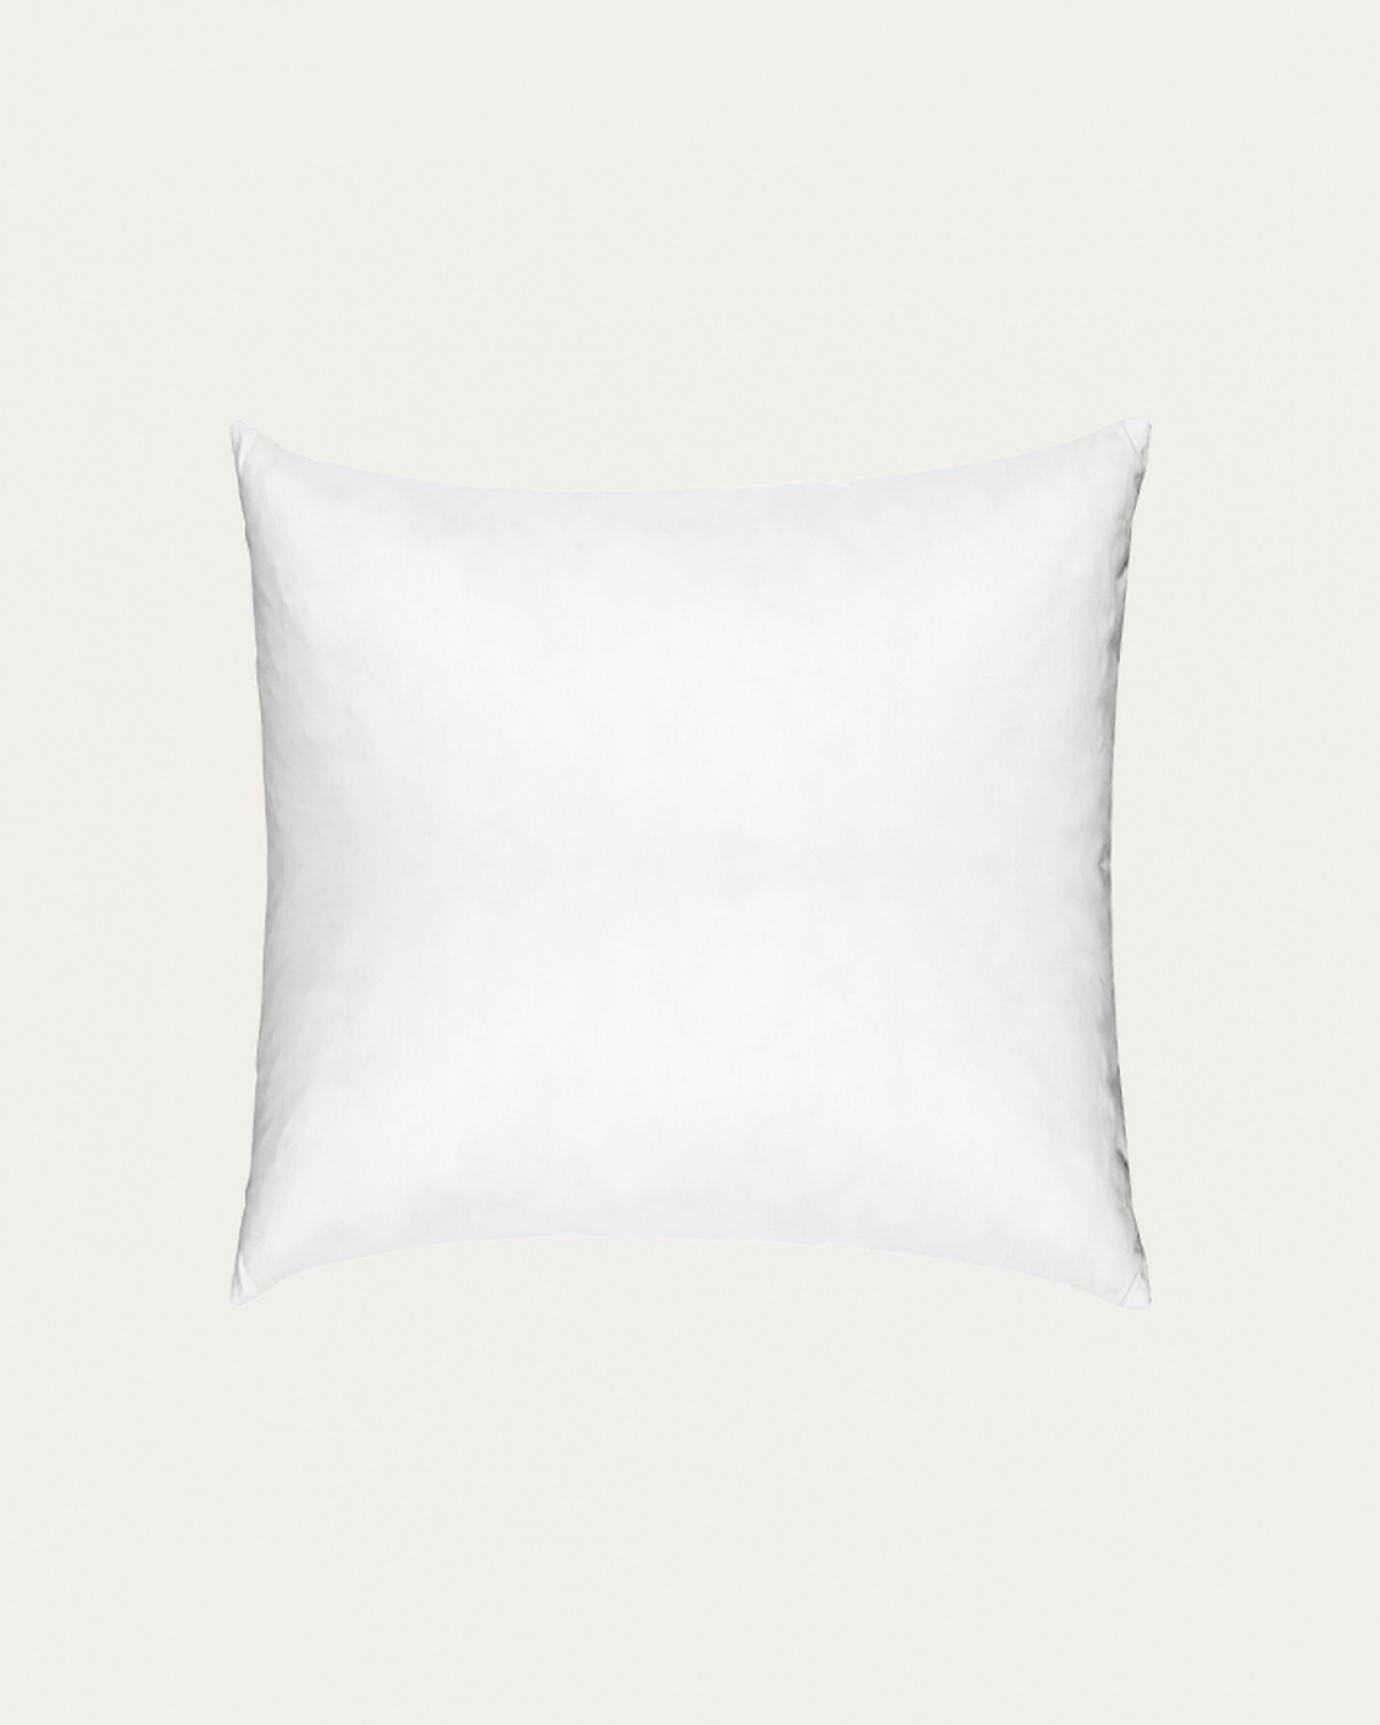 Product image white SYNTHETIC cushion insert made of cotton with polyester filling from LINUM DESIGN. Size 40x40 cm.